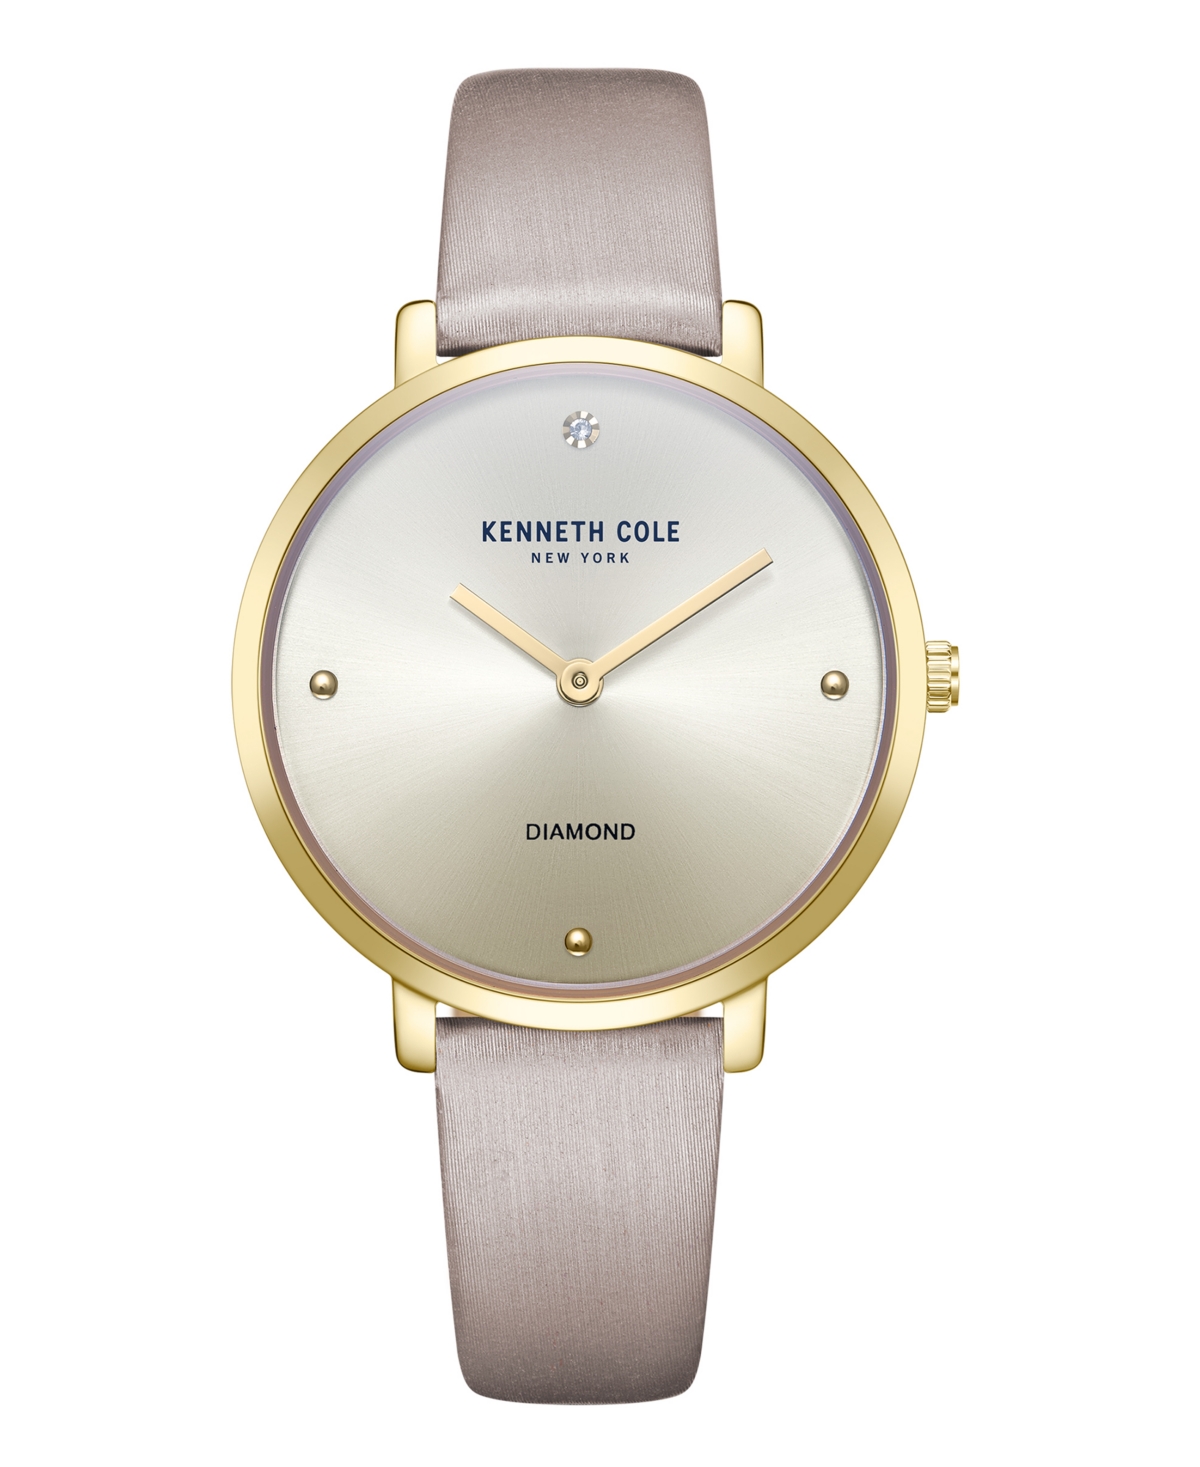 Kenneth Cole New York Women's Diamond Accent Dial Champagne Genuine Leather Strap Watch 34mm